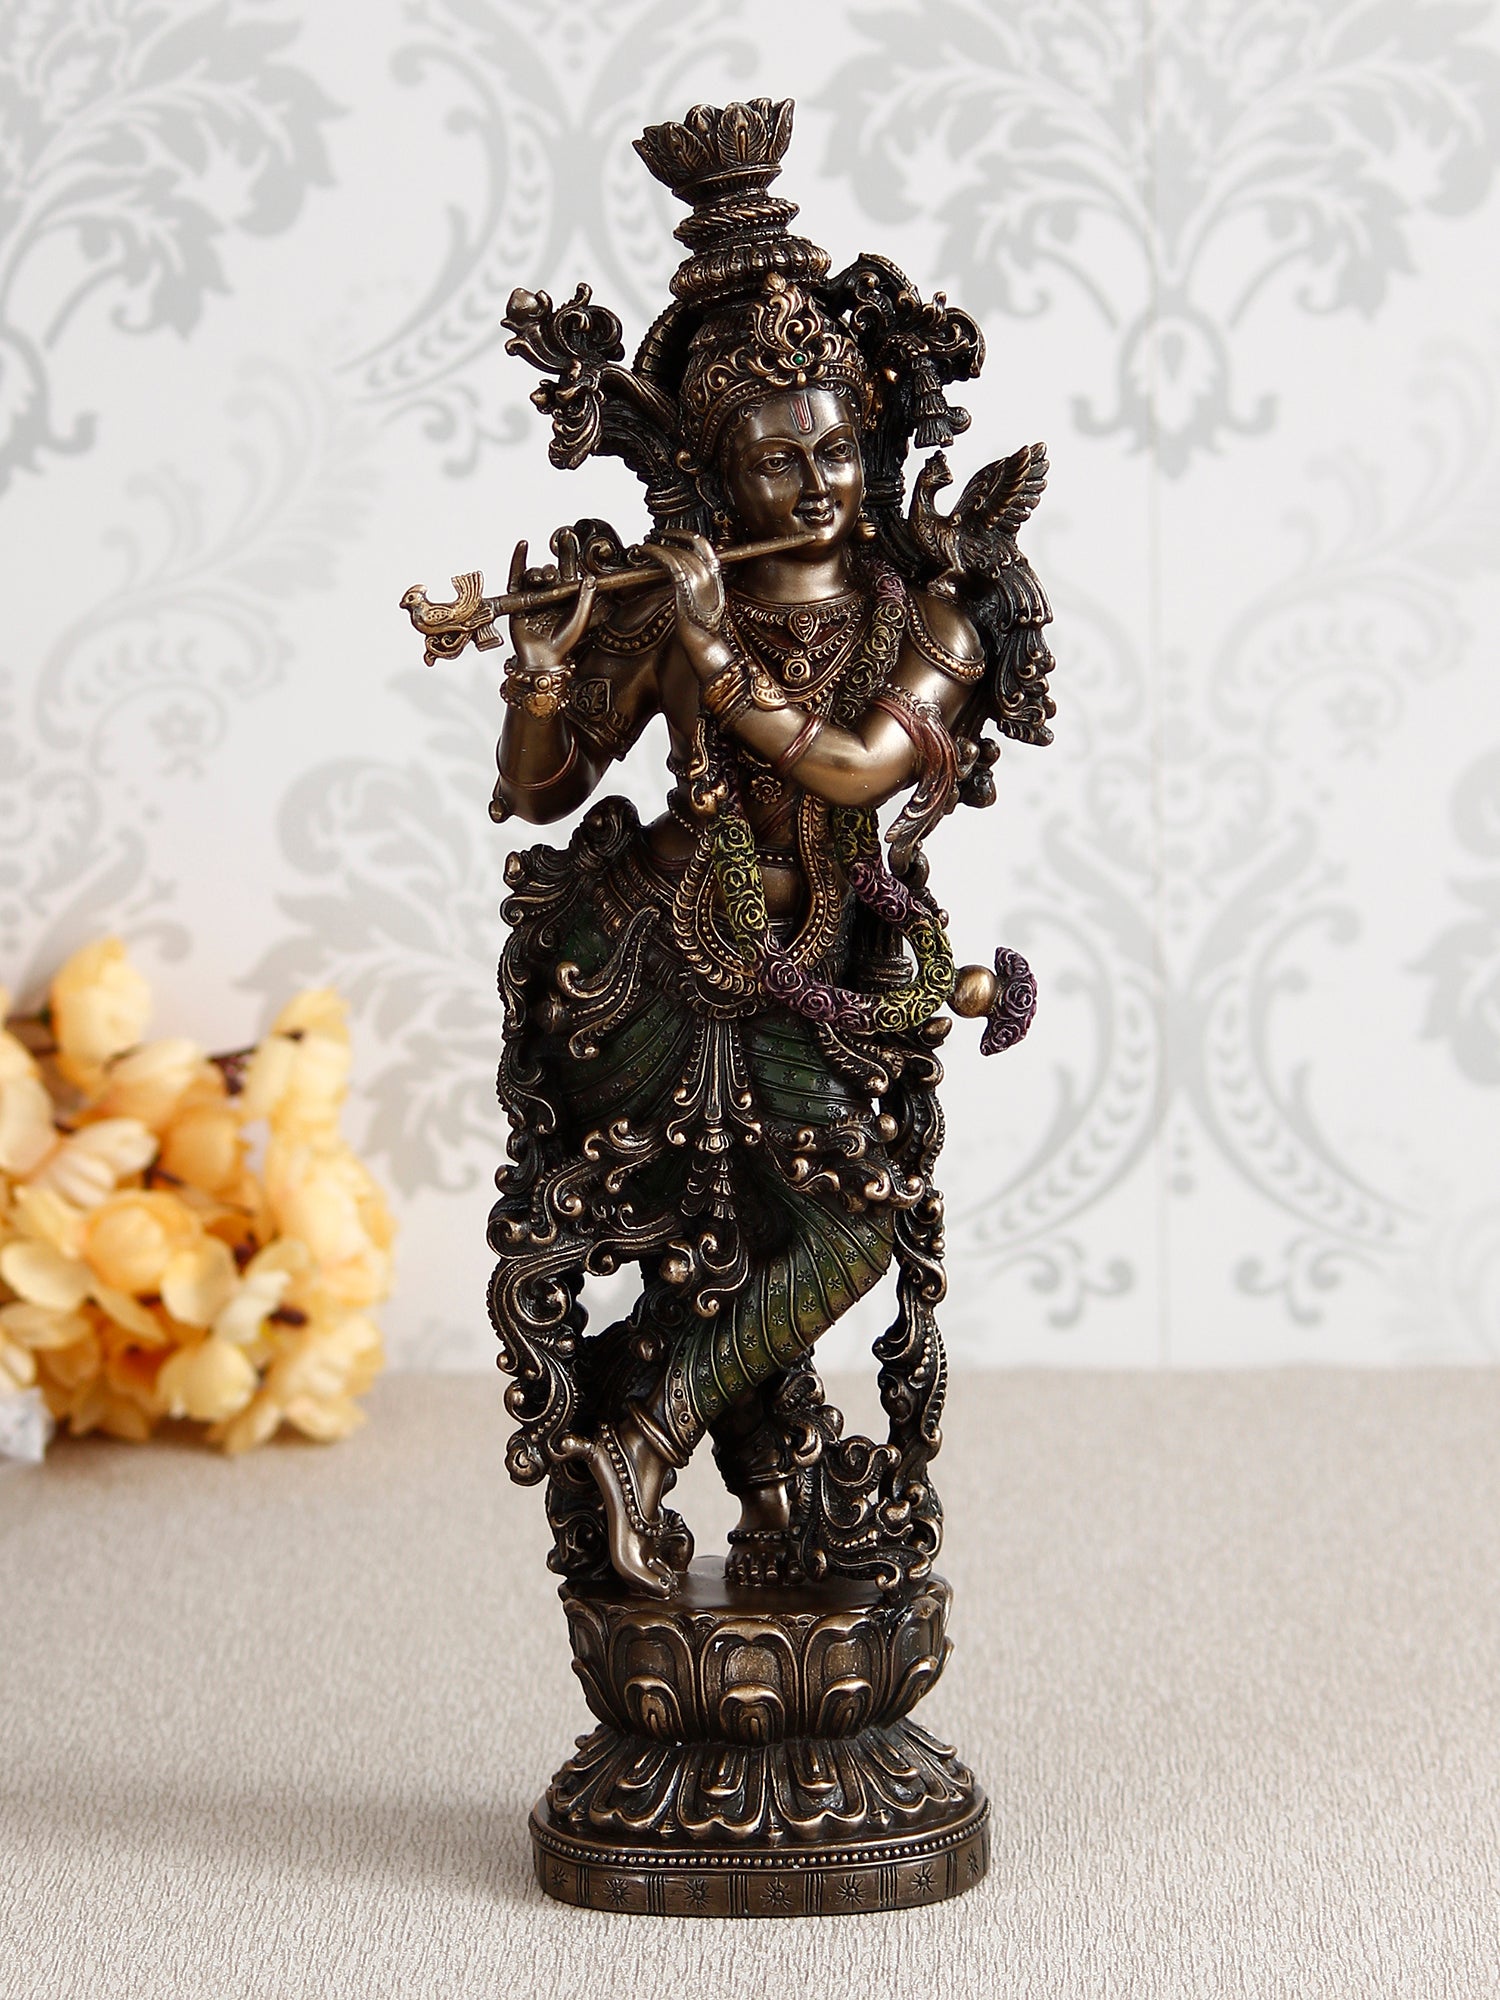 Brown Polyresin and Bronze Decorative Ethnic Carved Dancing Lord Krishna Playing Flute Figurine